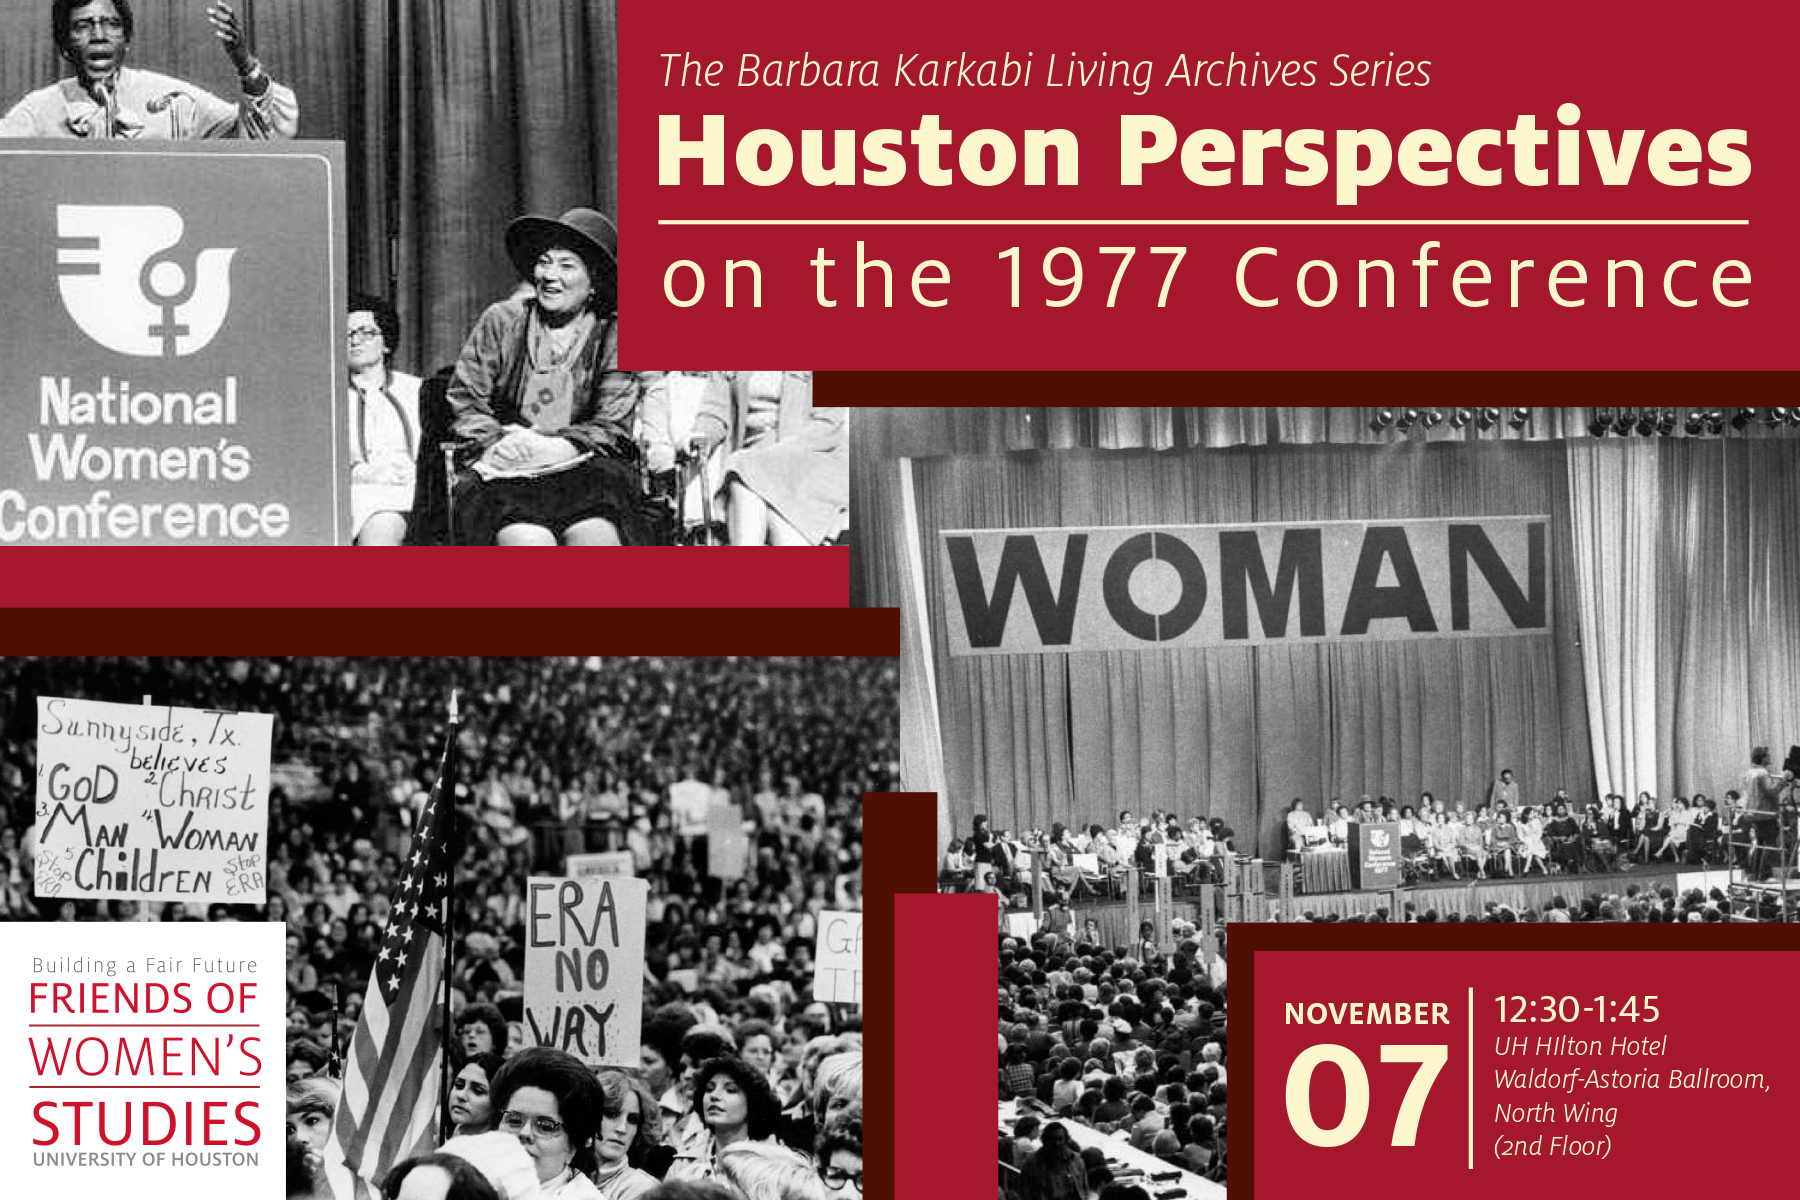 Houston Perspectives on the 1977 Conference